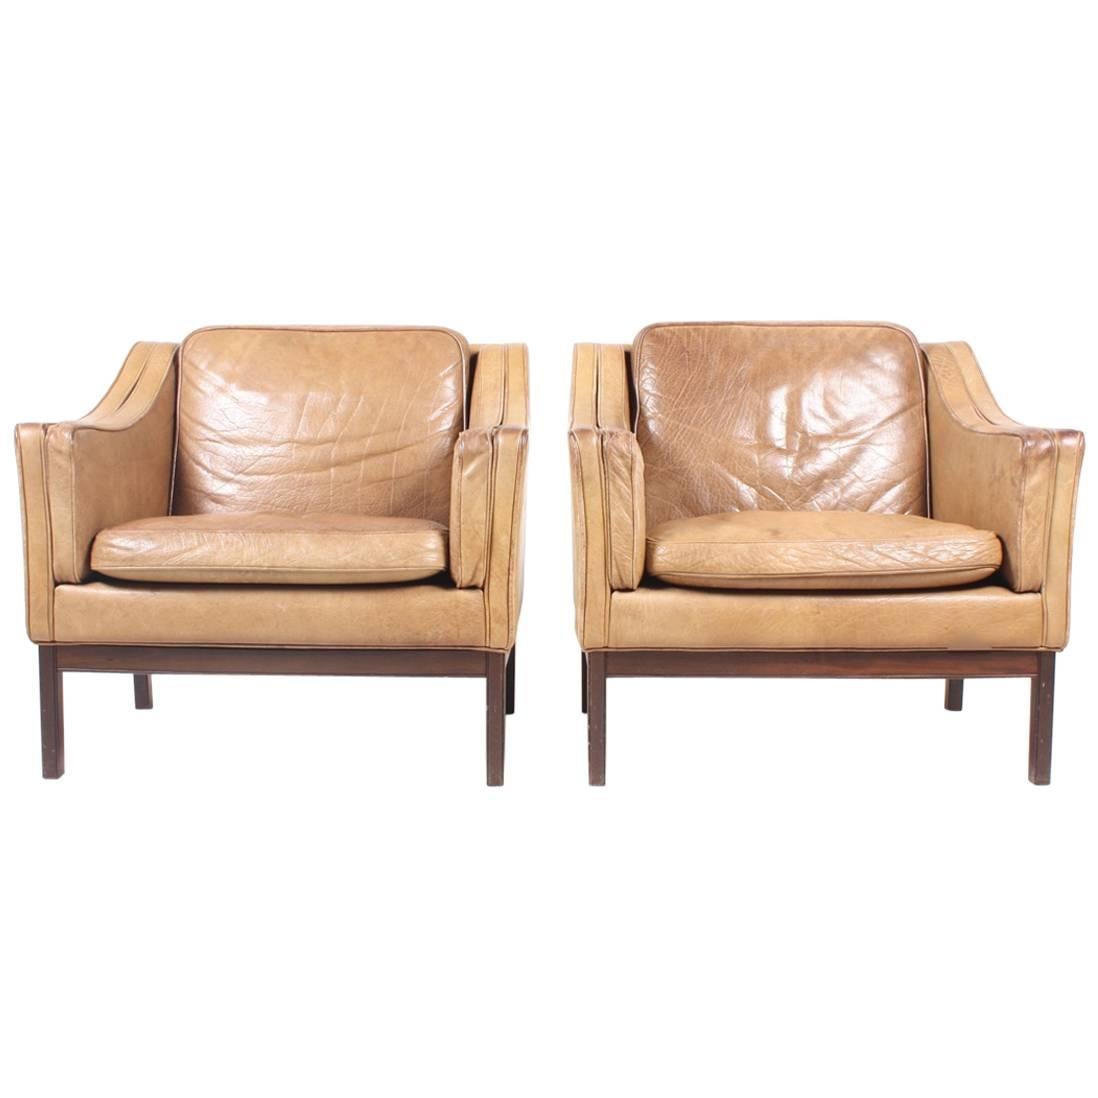 Pair of Danish Leather Lounge Chairs, 1970s